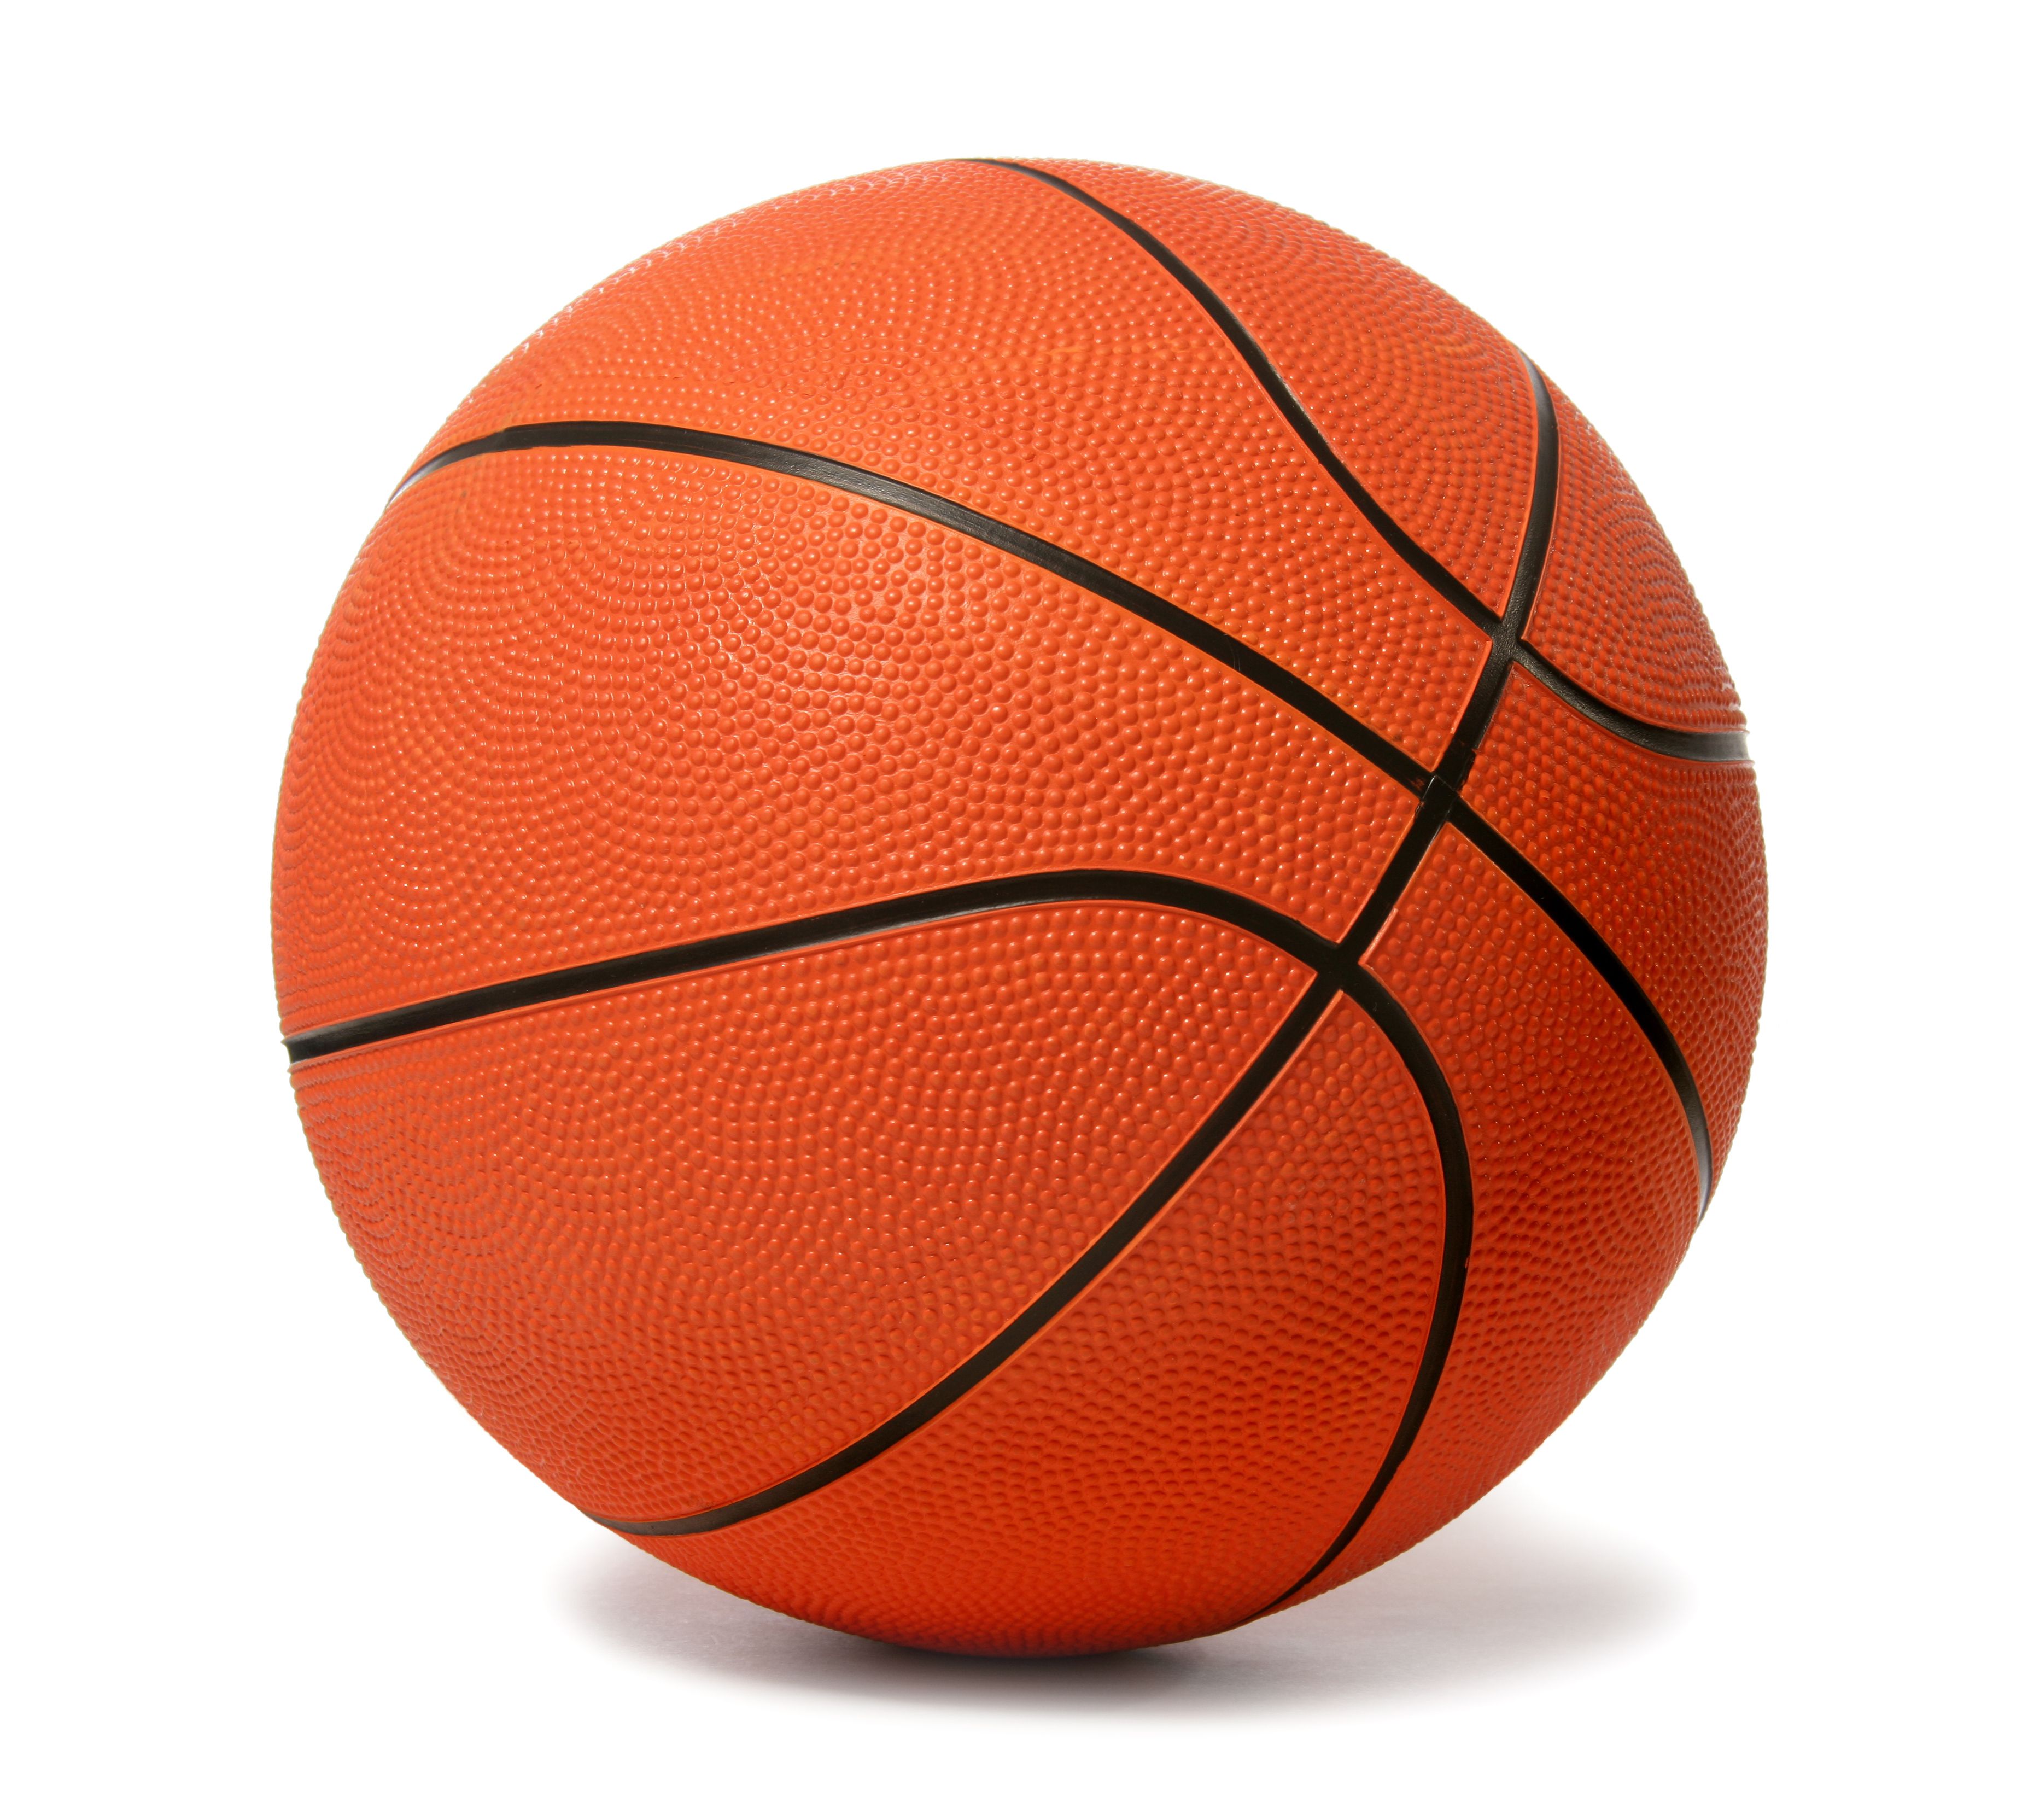 Basketball Wordsearch, Vocabulary, Crossword, and More